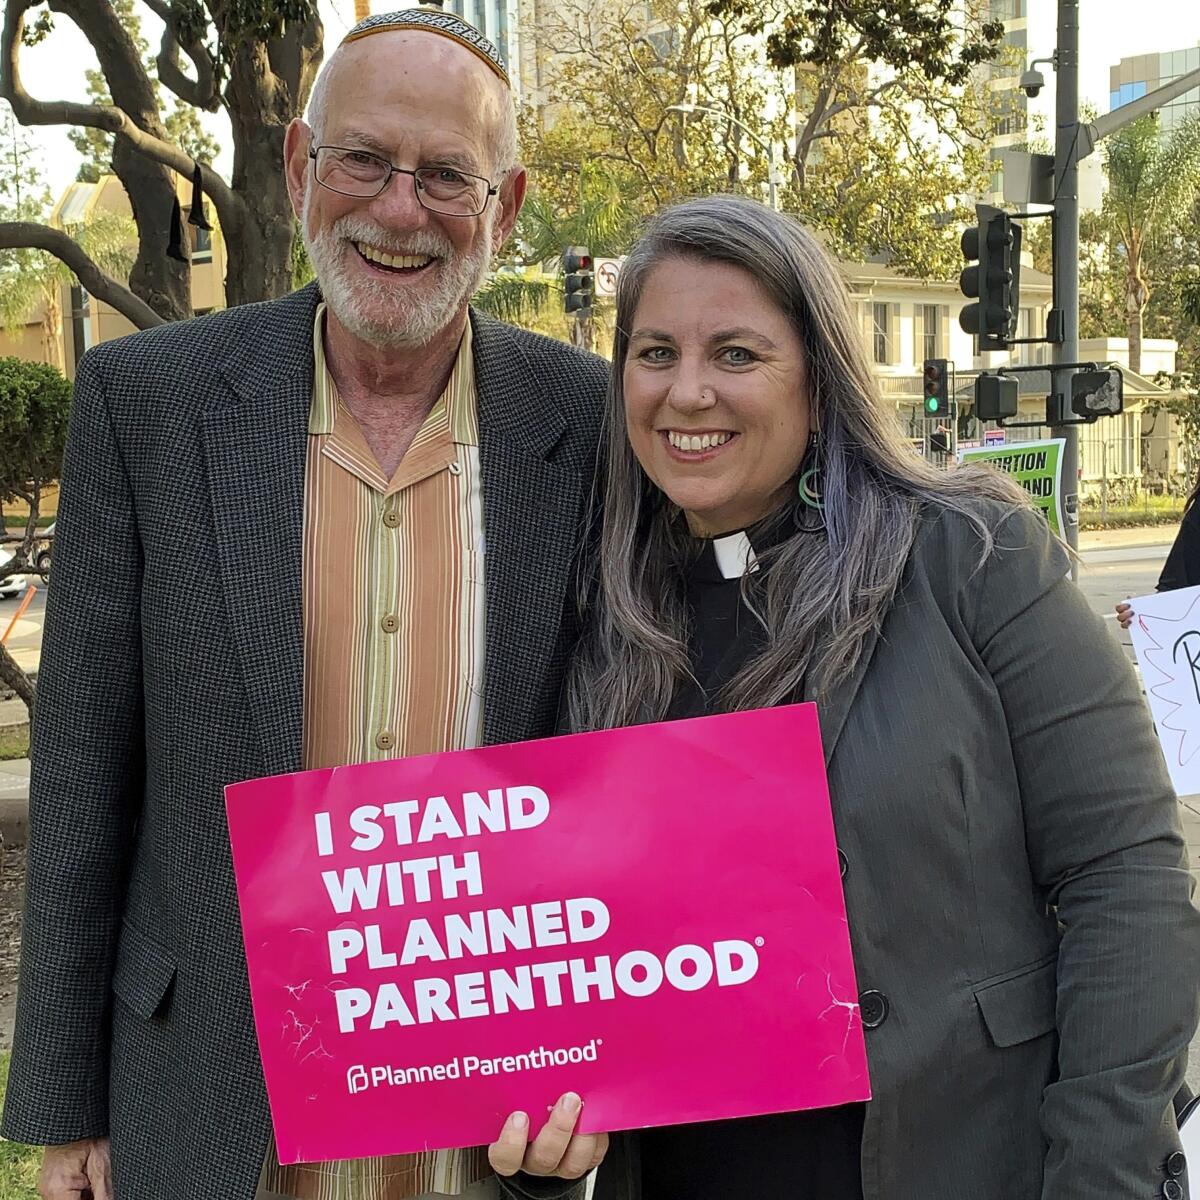 A rabbi and a minister hold a "I stand with Planned Parenthood" sign.